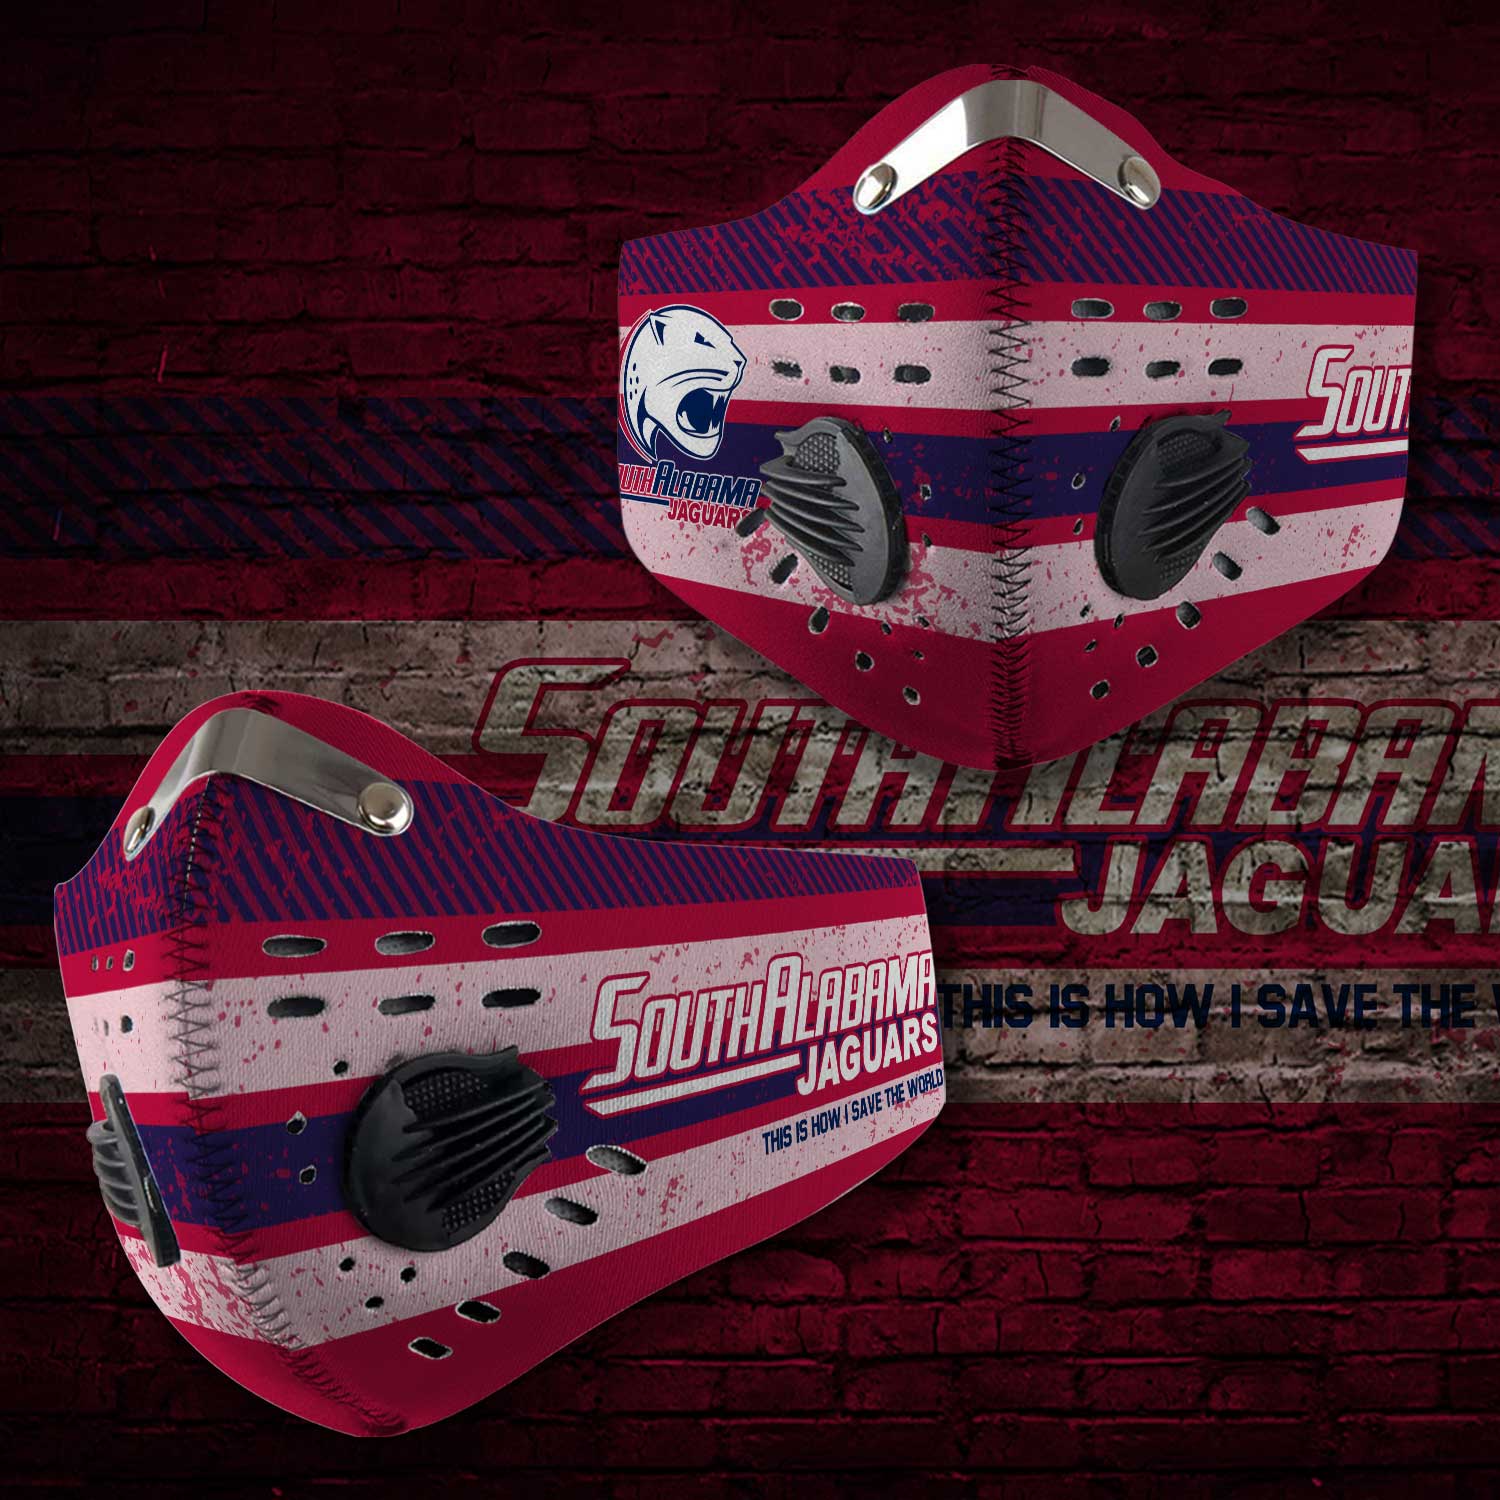 South alabama jaguars this is how i save the world face mask